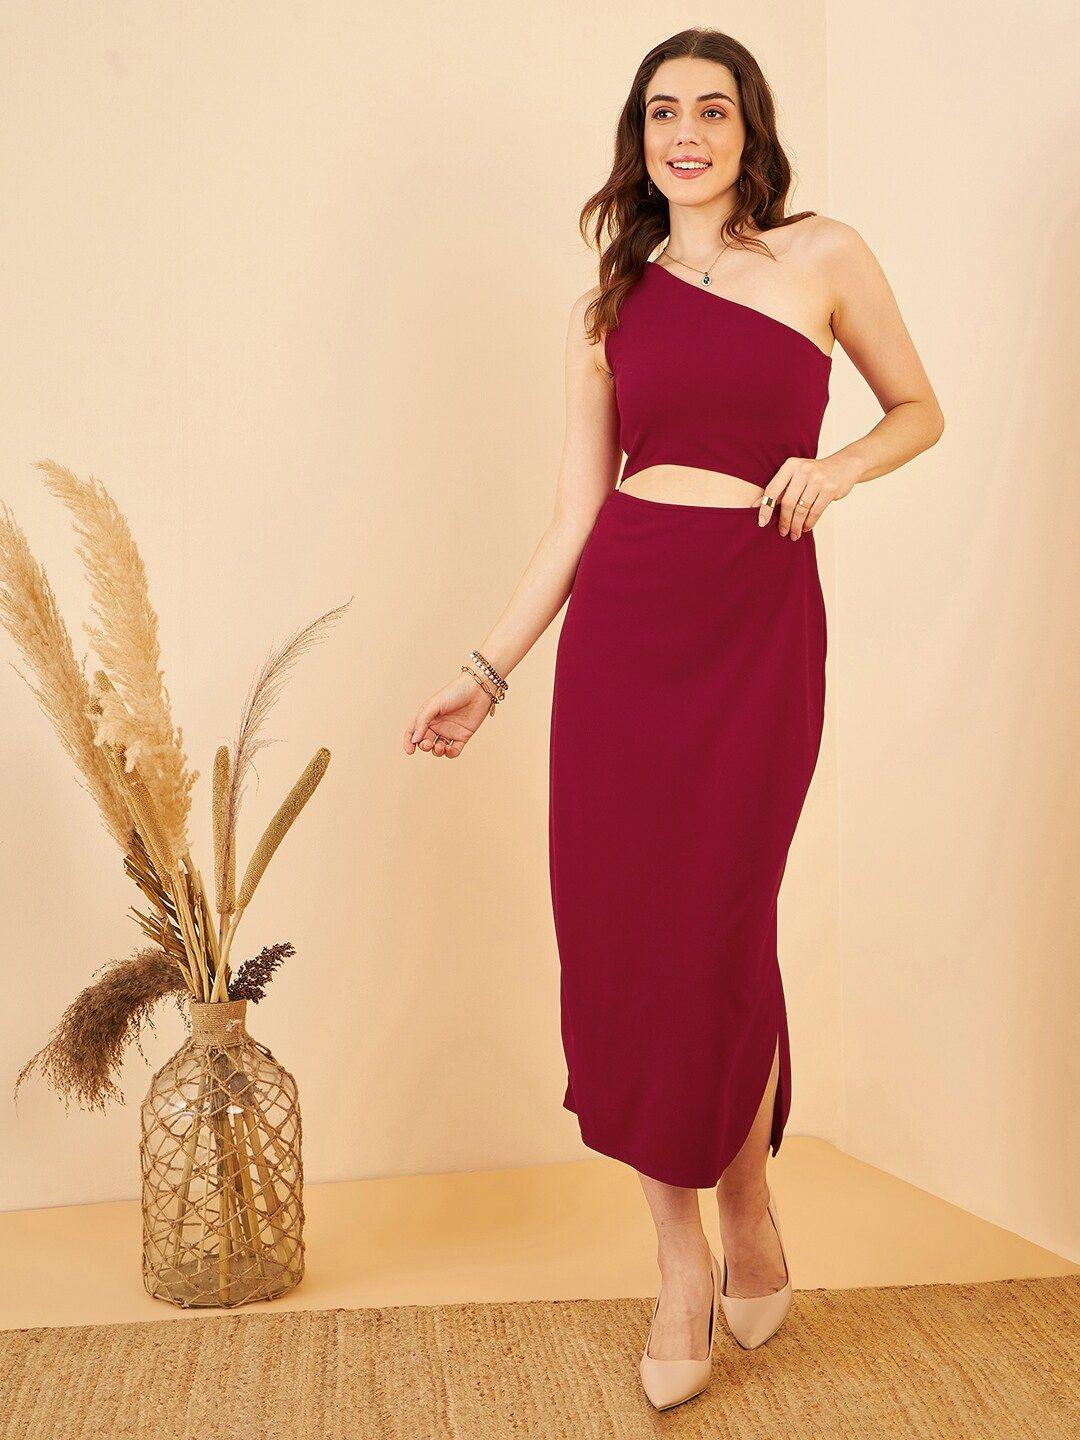 marie claire one shoulder cut-out detailed sheath midi dress